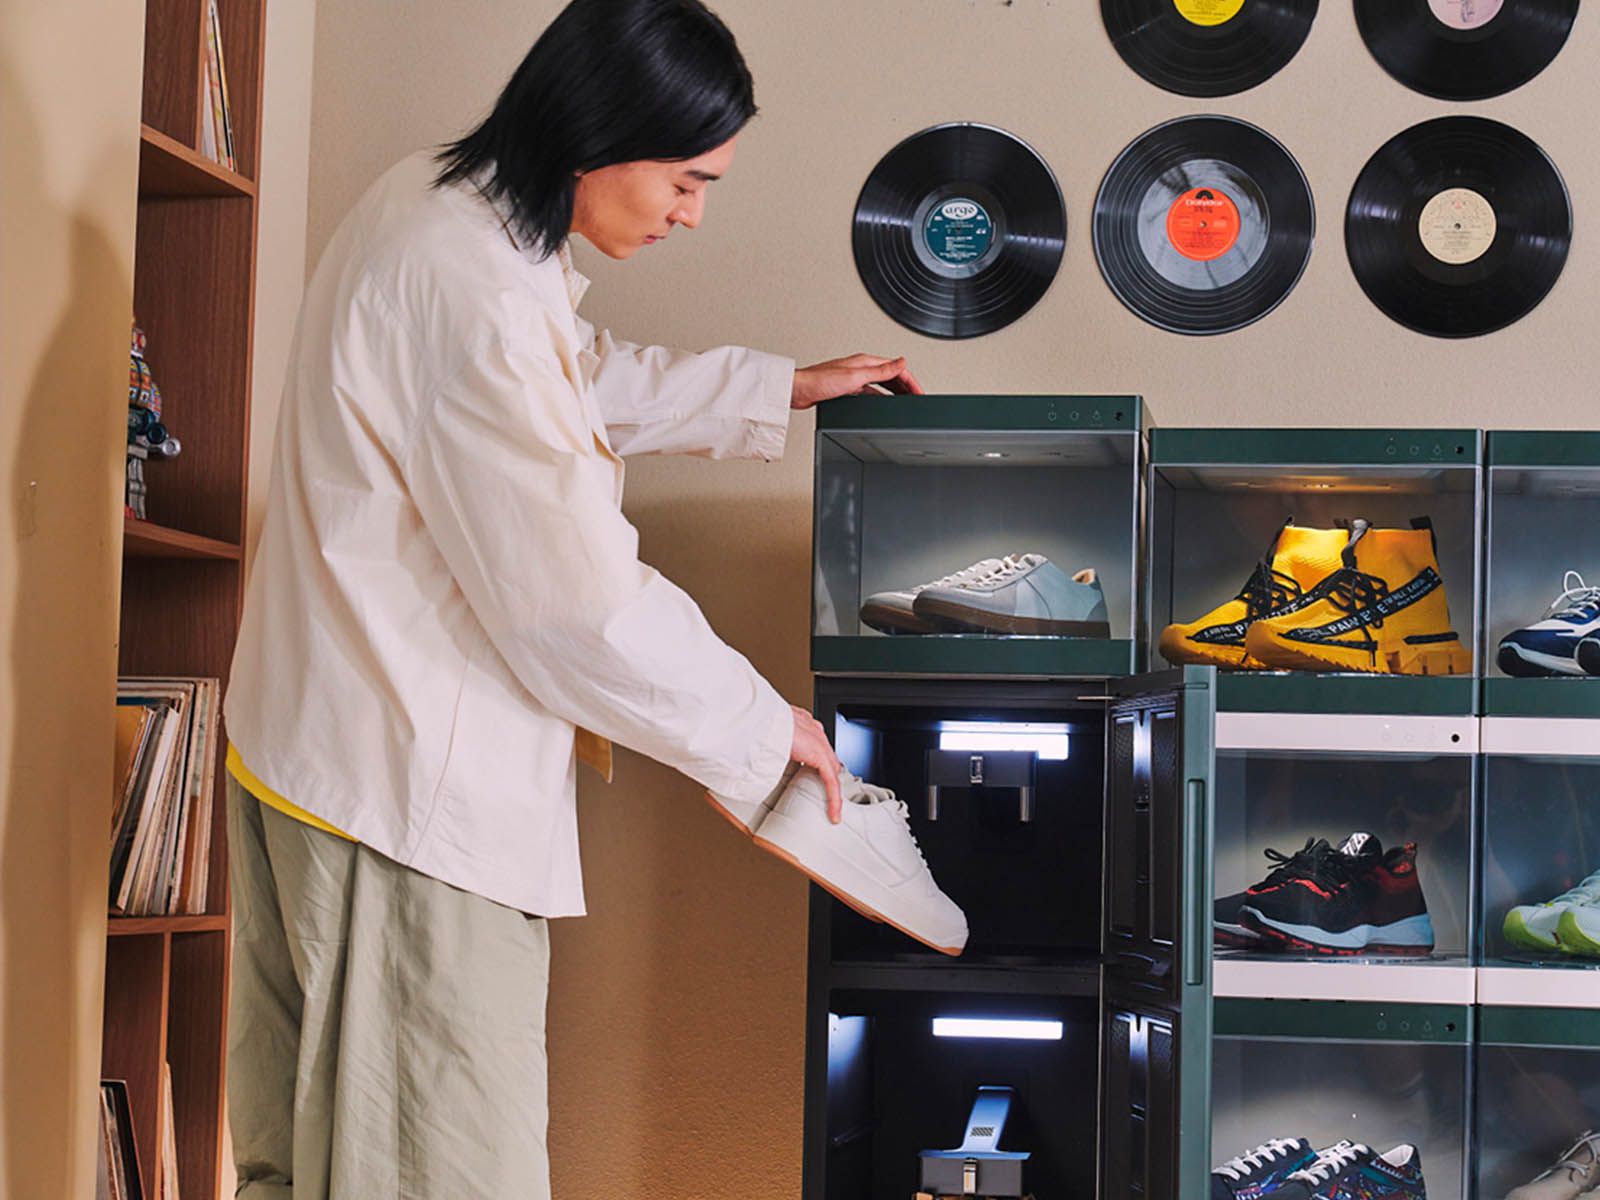 For sneakerheads, this is the LG shoe rack you must have